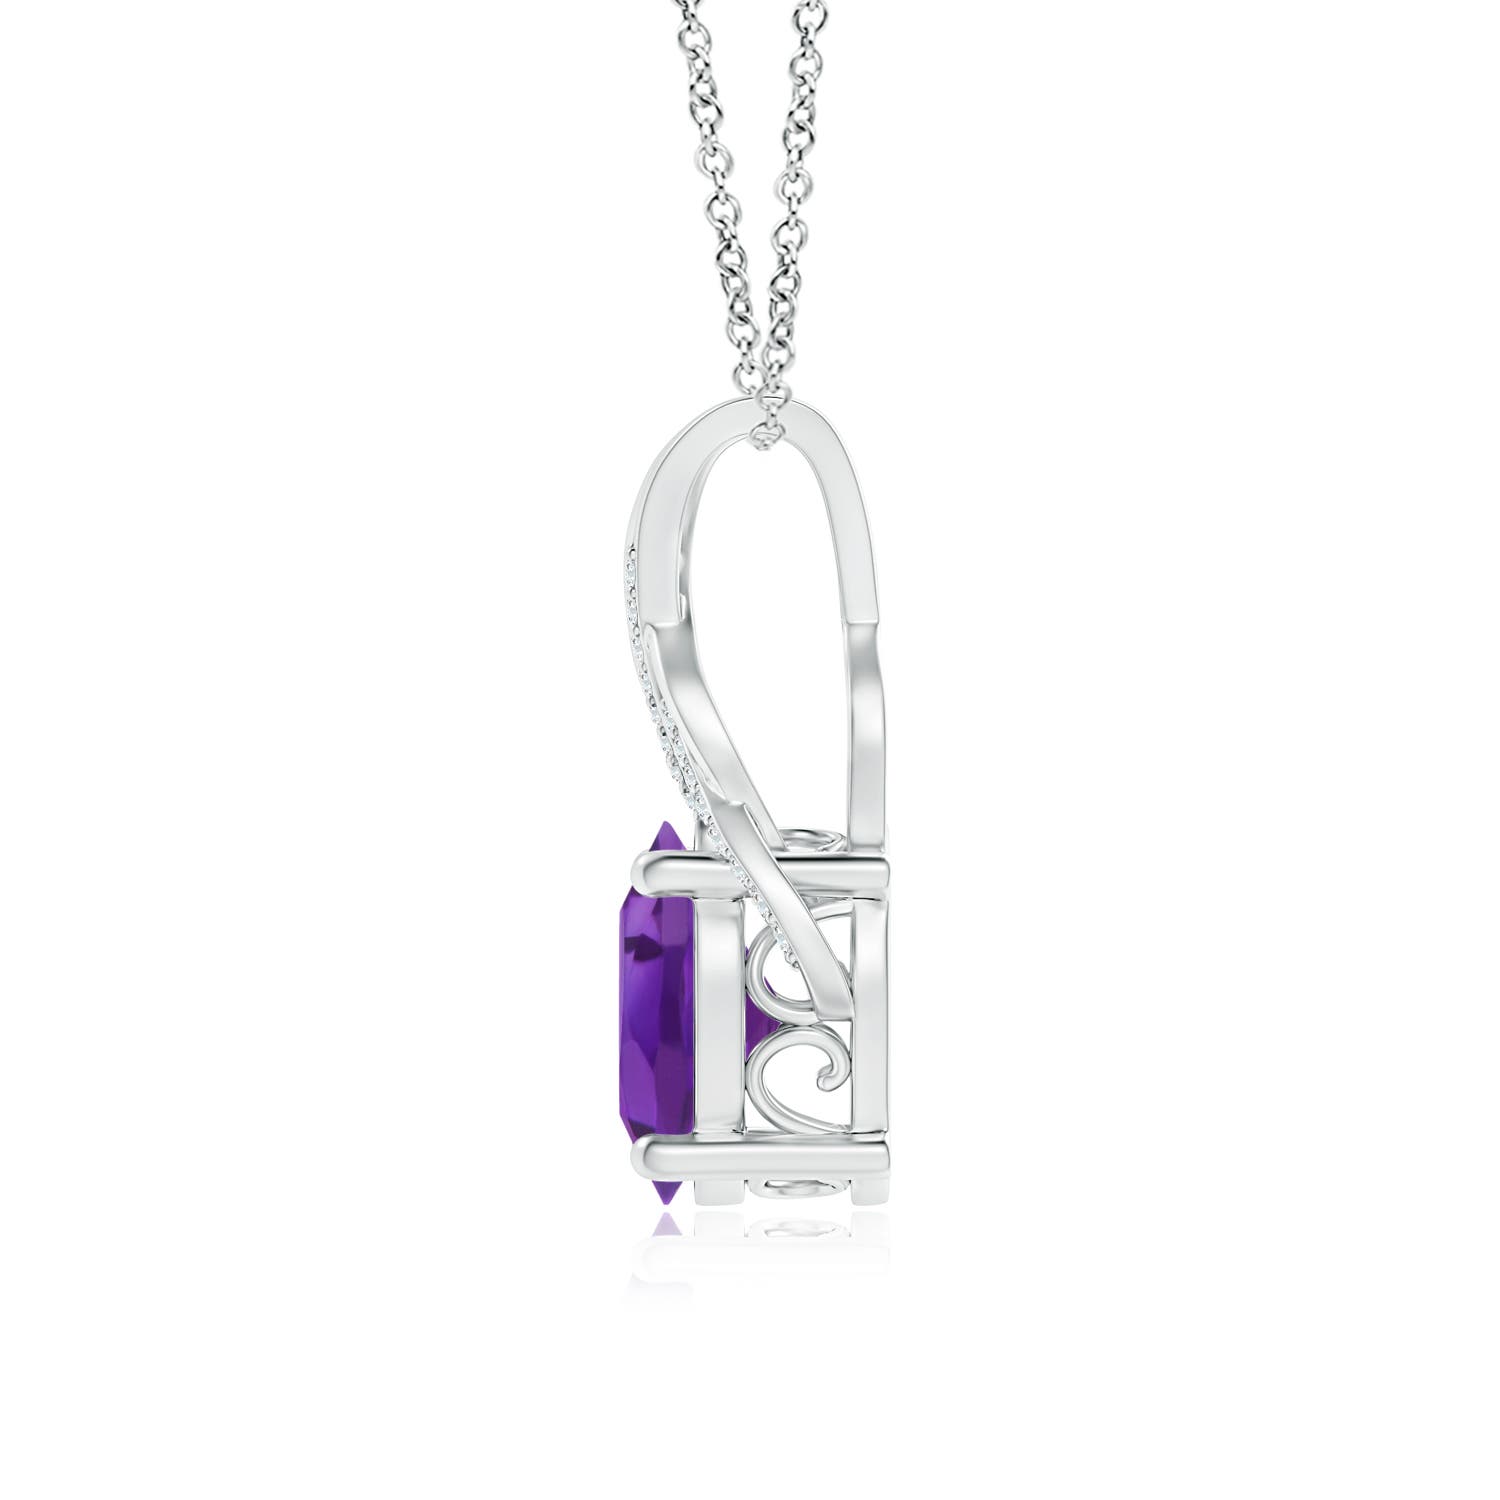 AAA - Amethyst / 4.43 CT / 14 KT White Gold